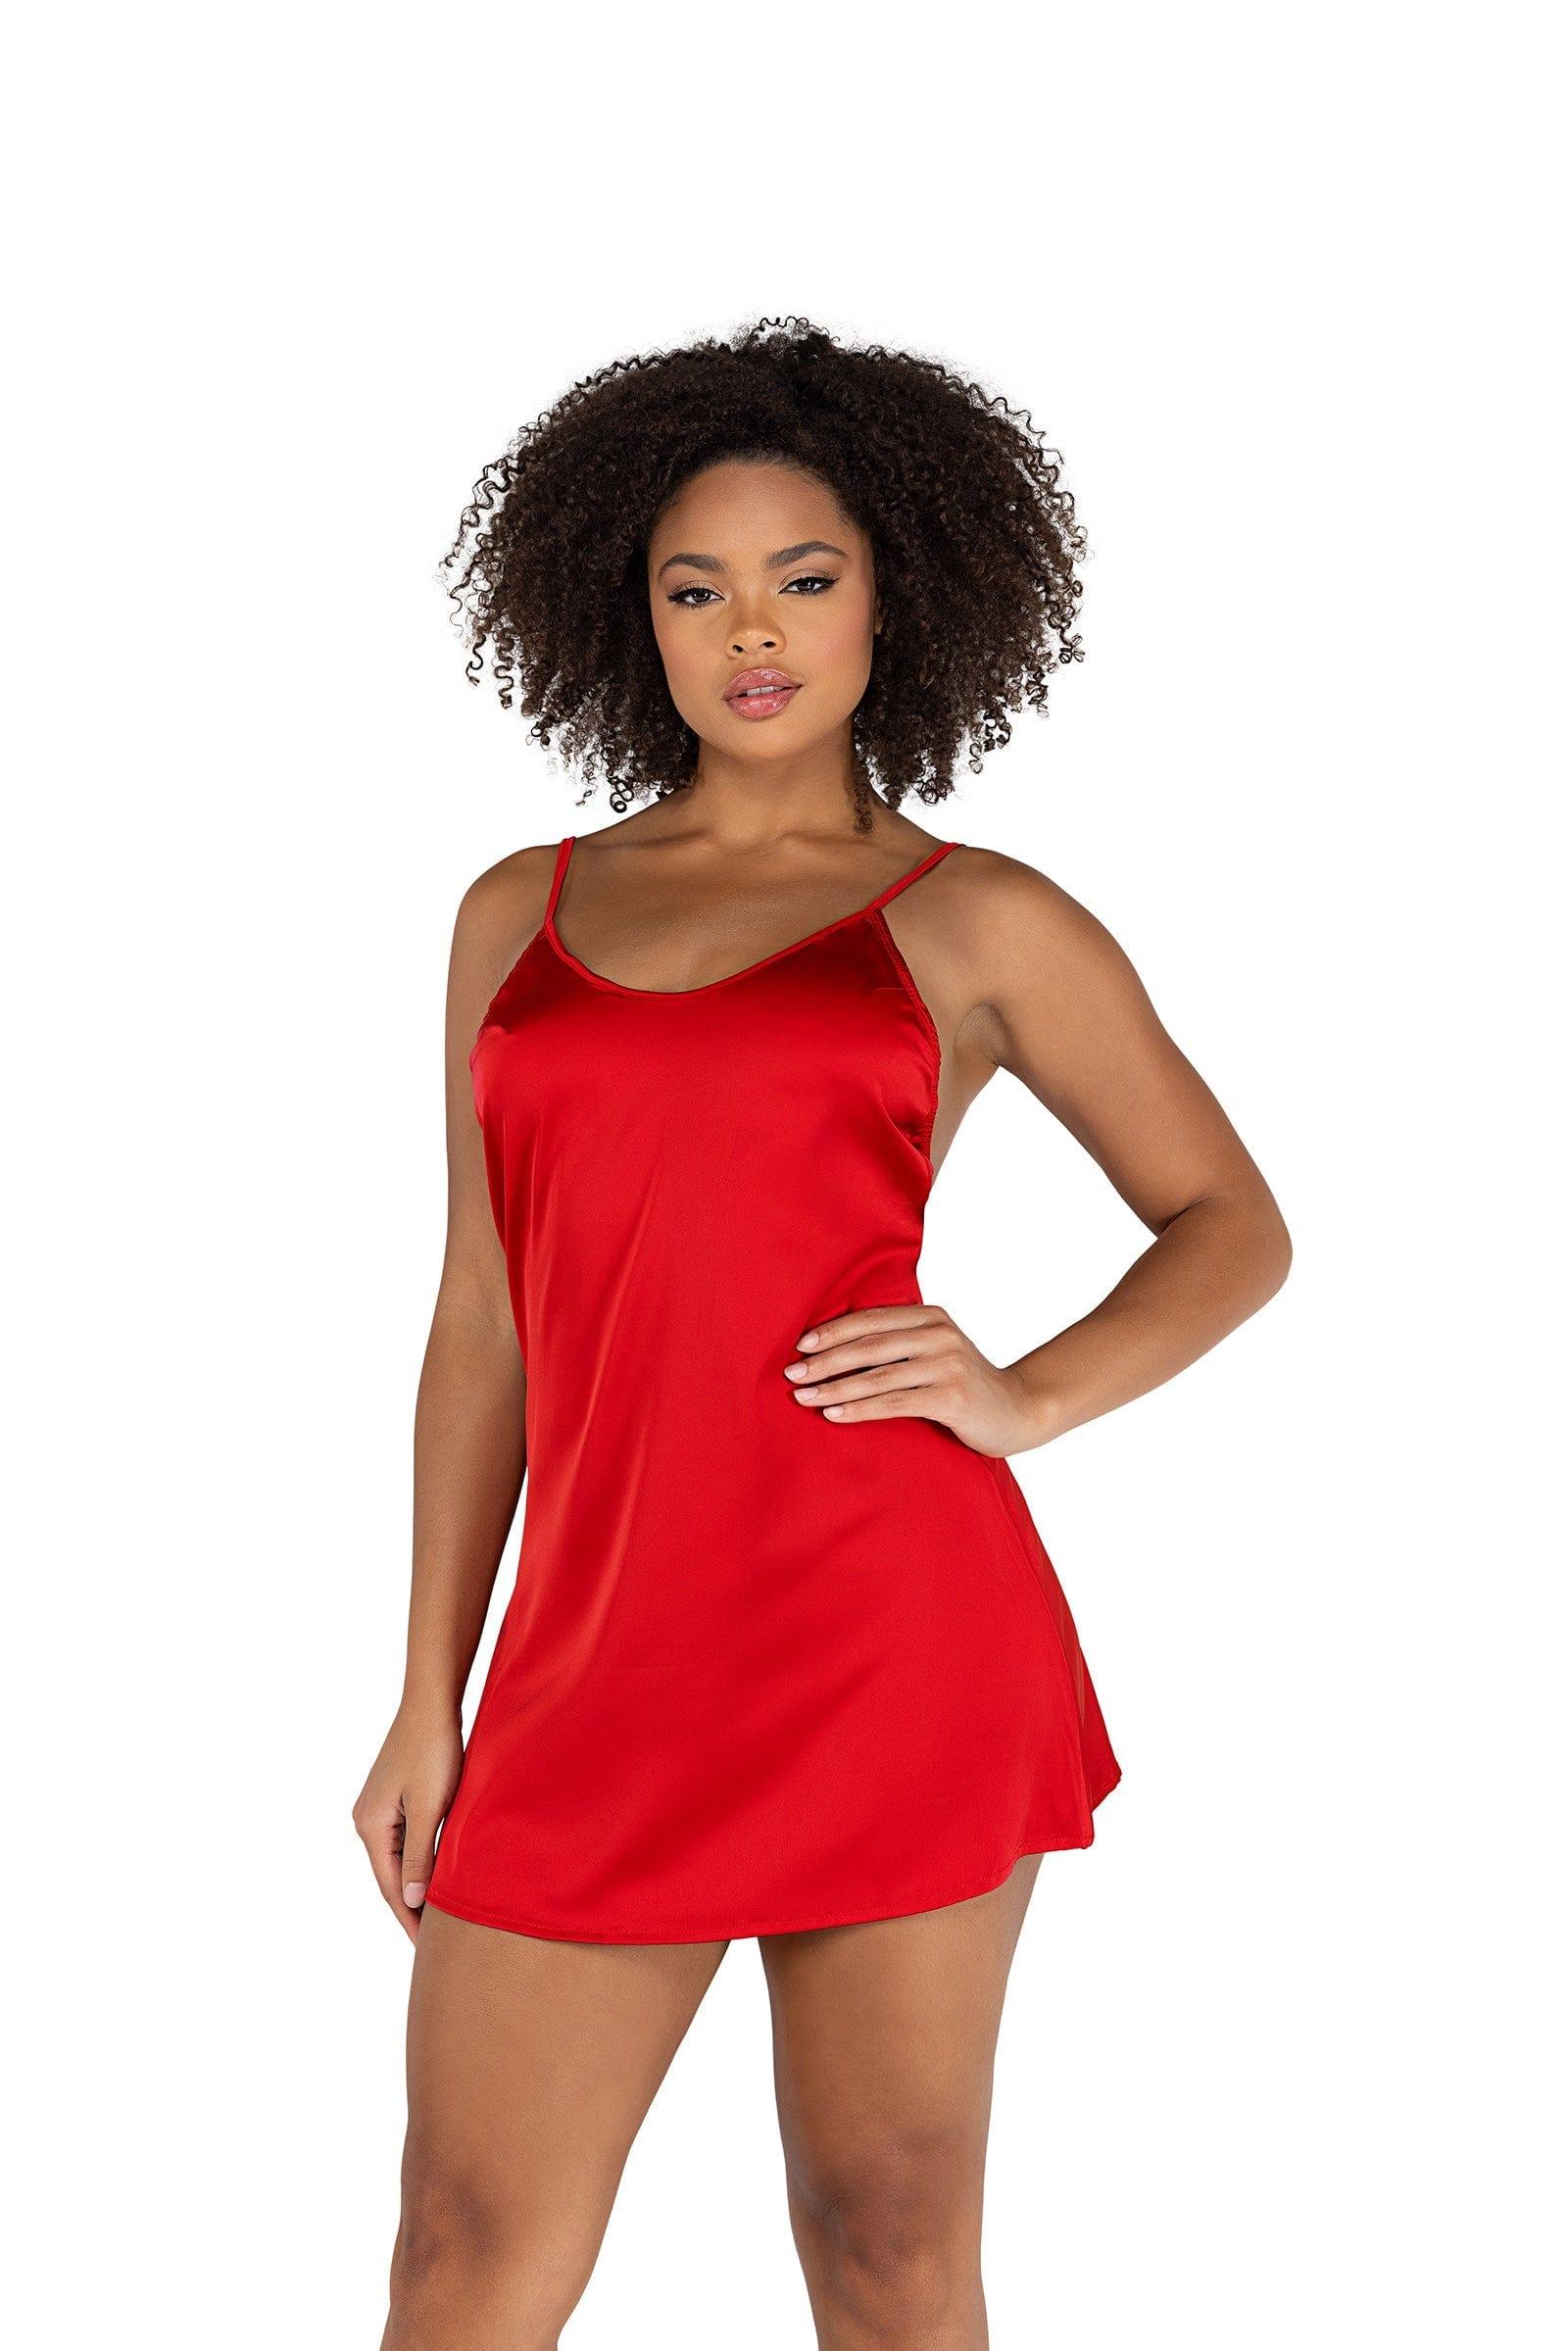 Roma Confidential Chemises Small / Red Soft Satin Chemise